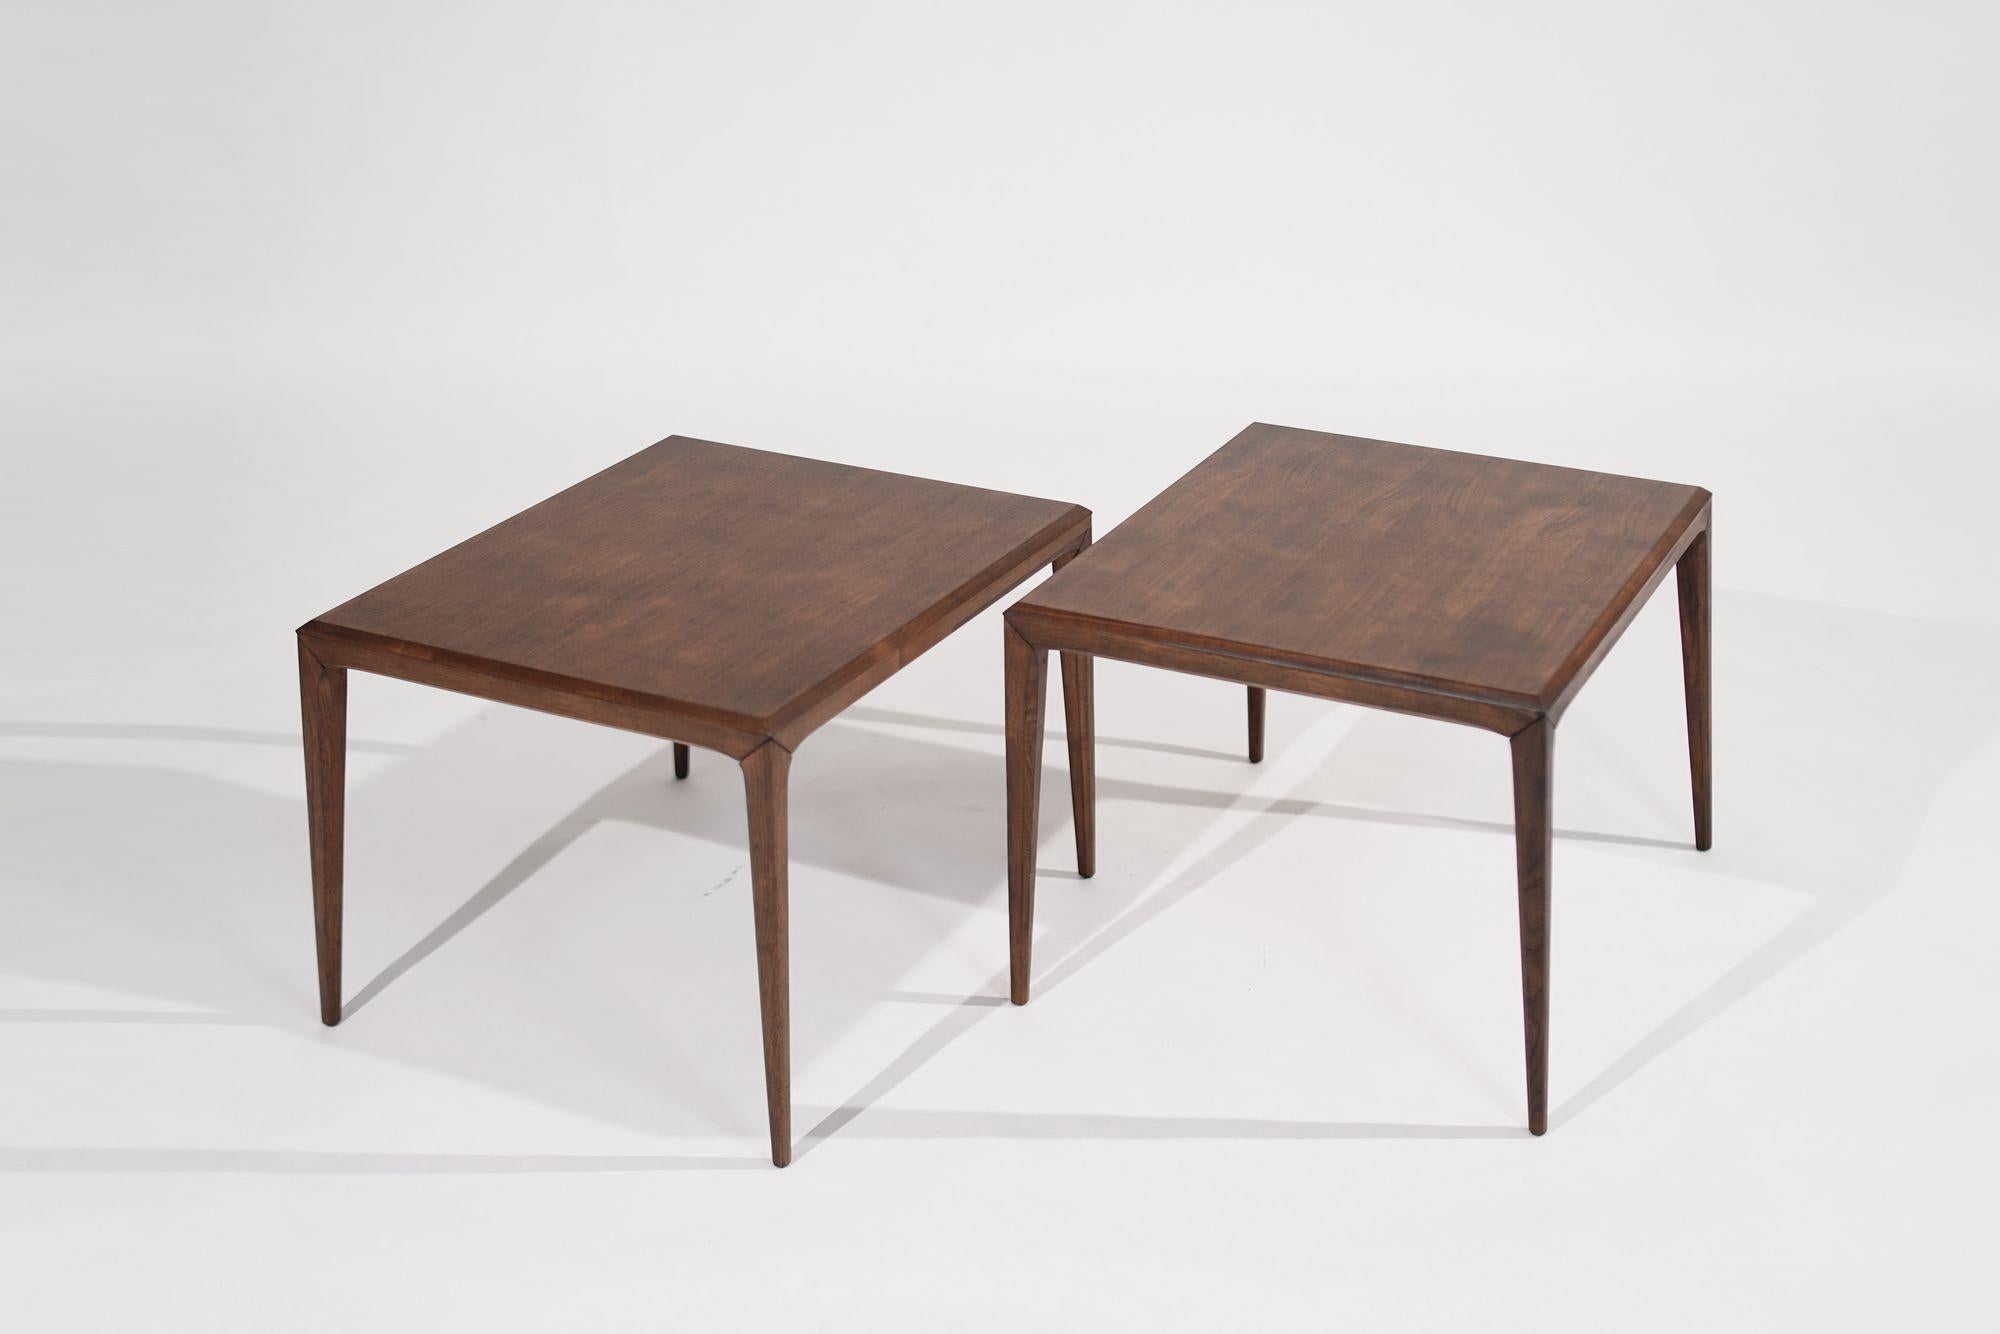 20th Century Large-Scale Teak End Tables by Johannes Andersen, Denmark, C. 1950s For Sale